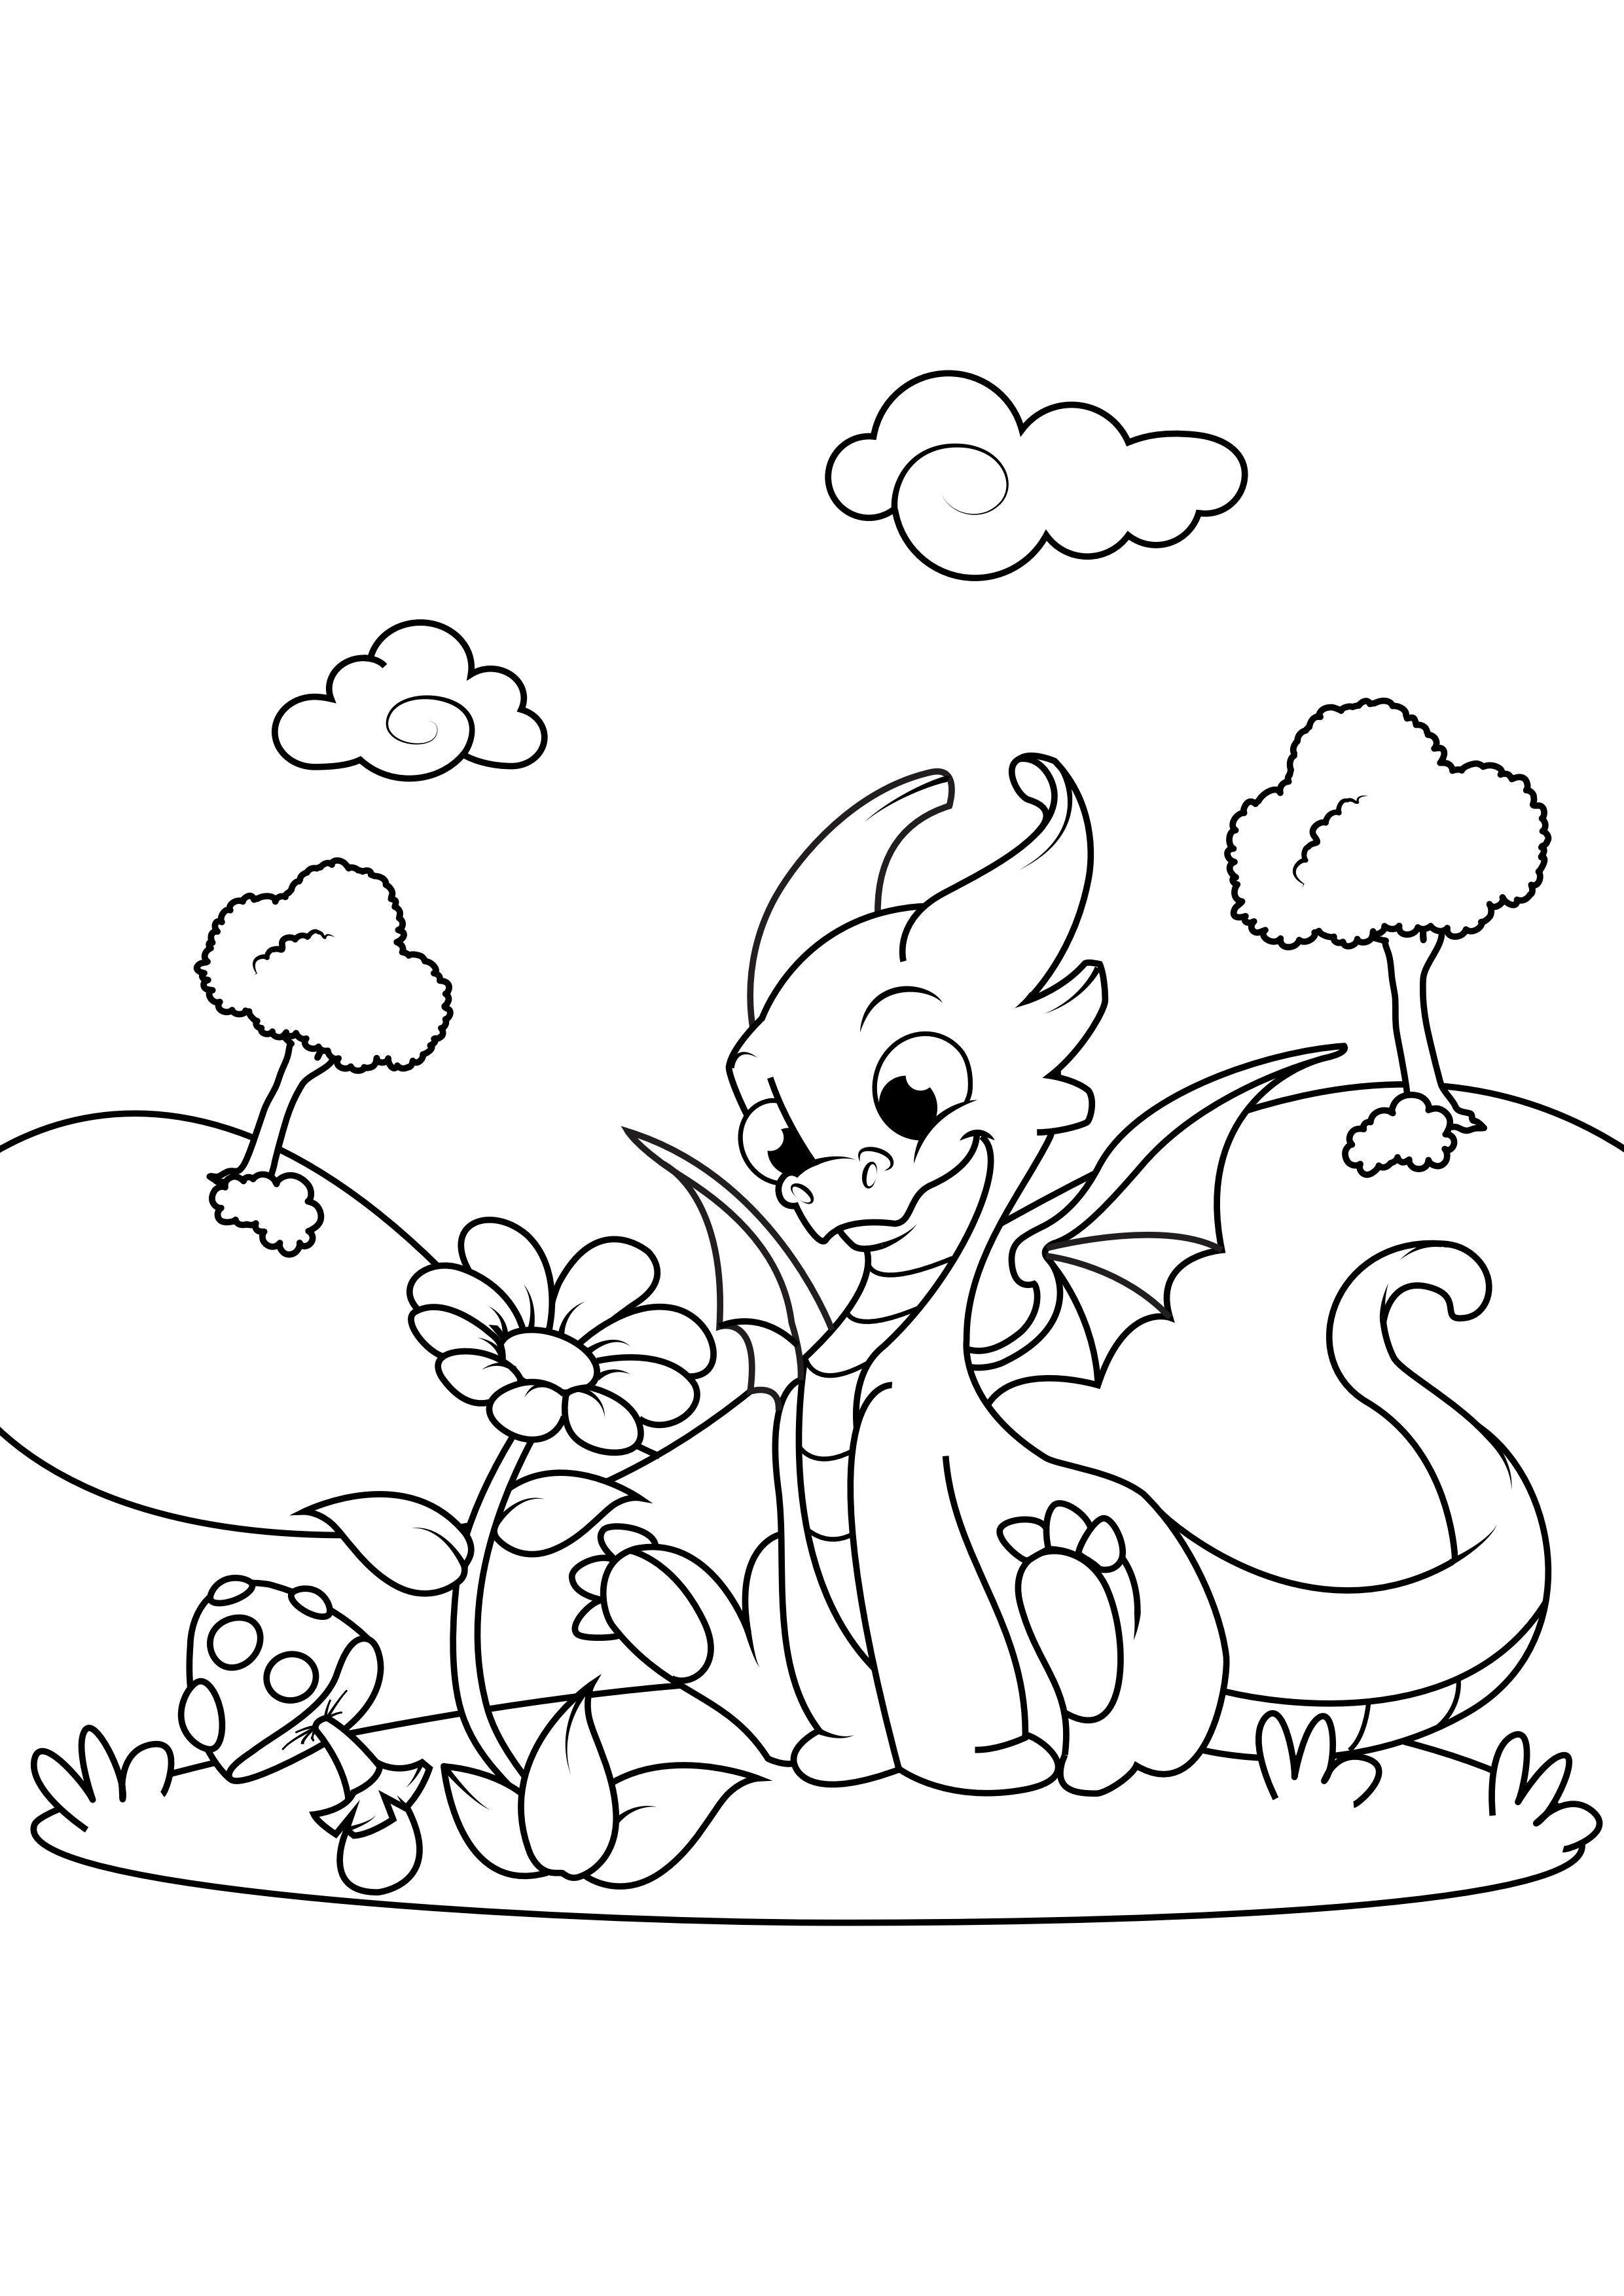 Coloring page dragon with flower